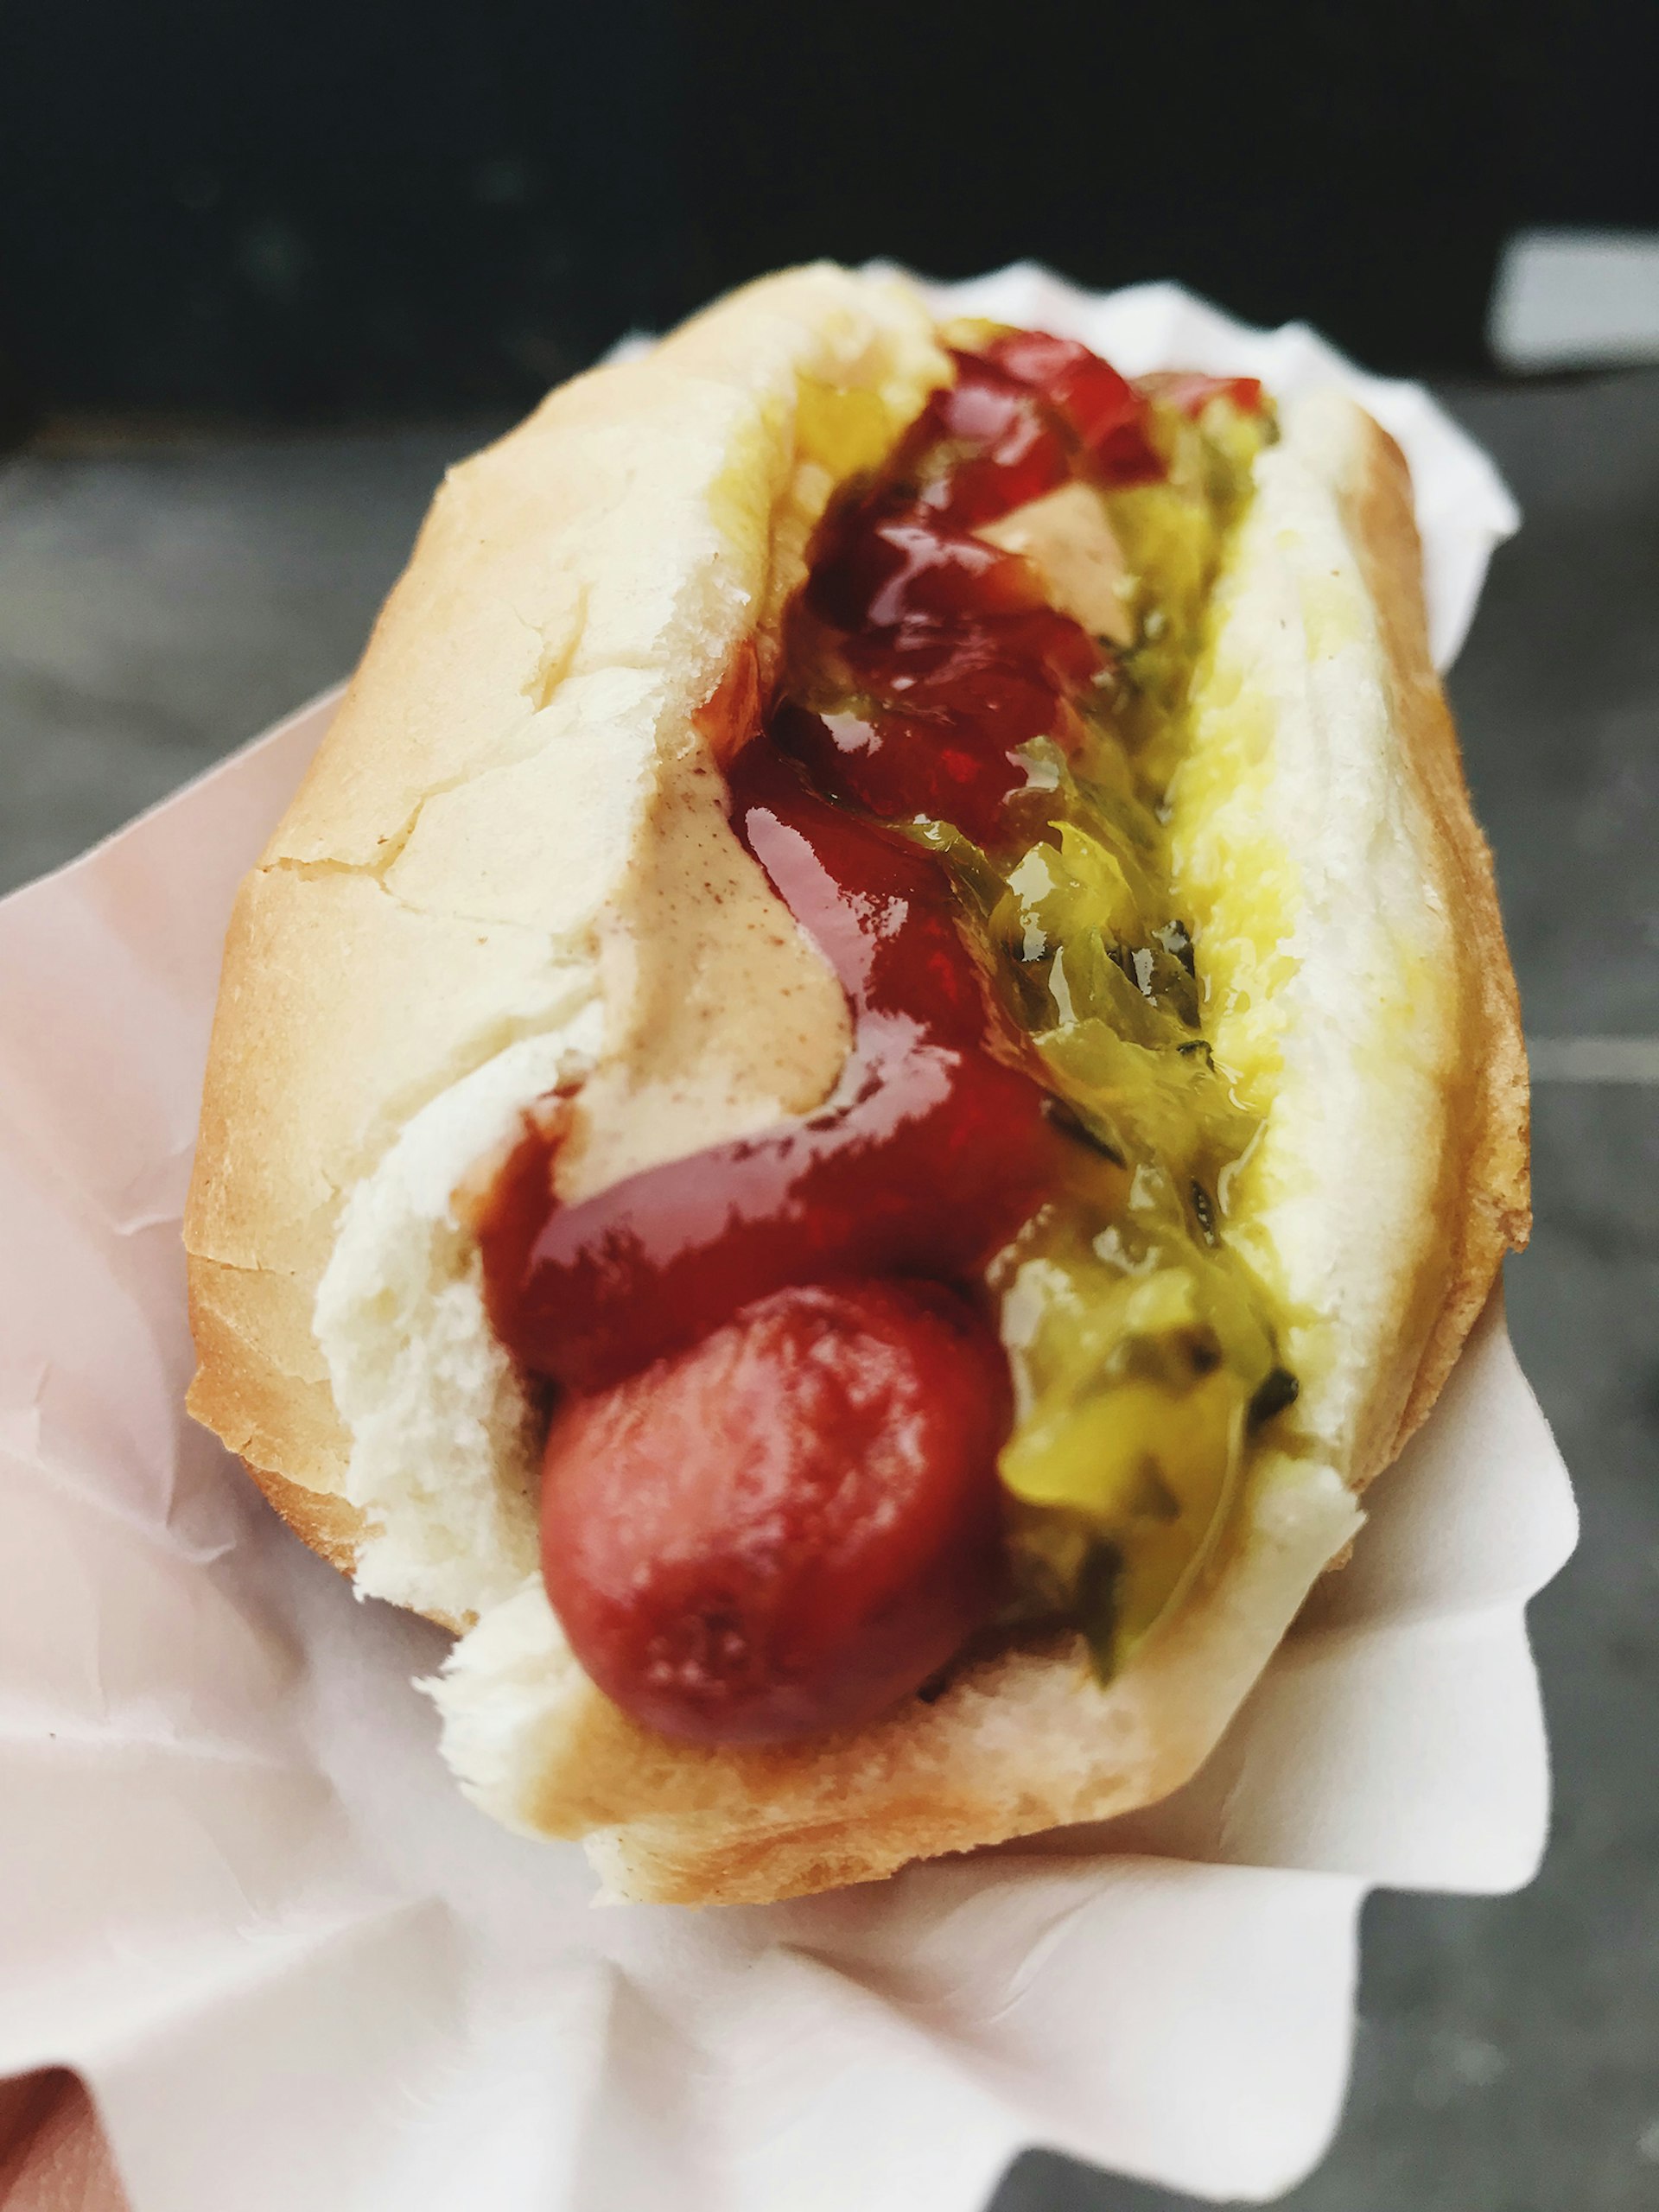 close up of a hot dog in a bun with relish, mustard and ketchup